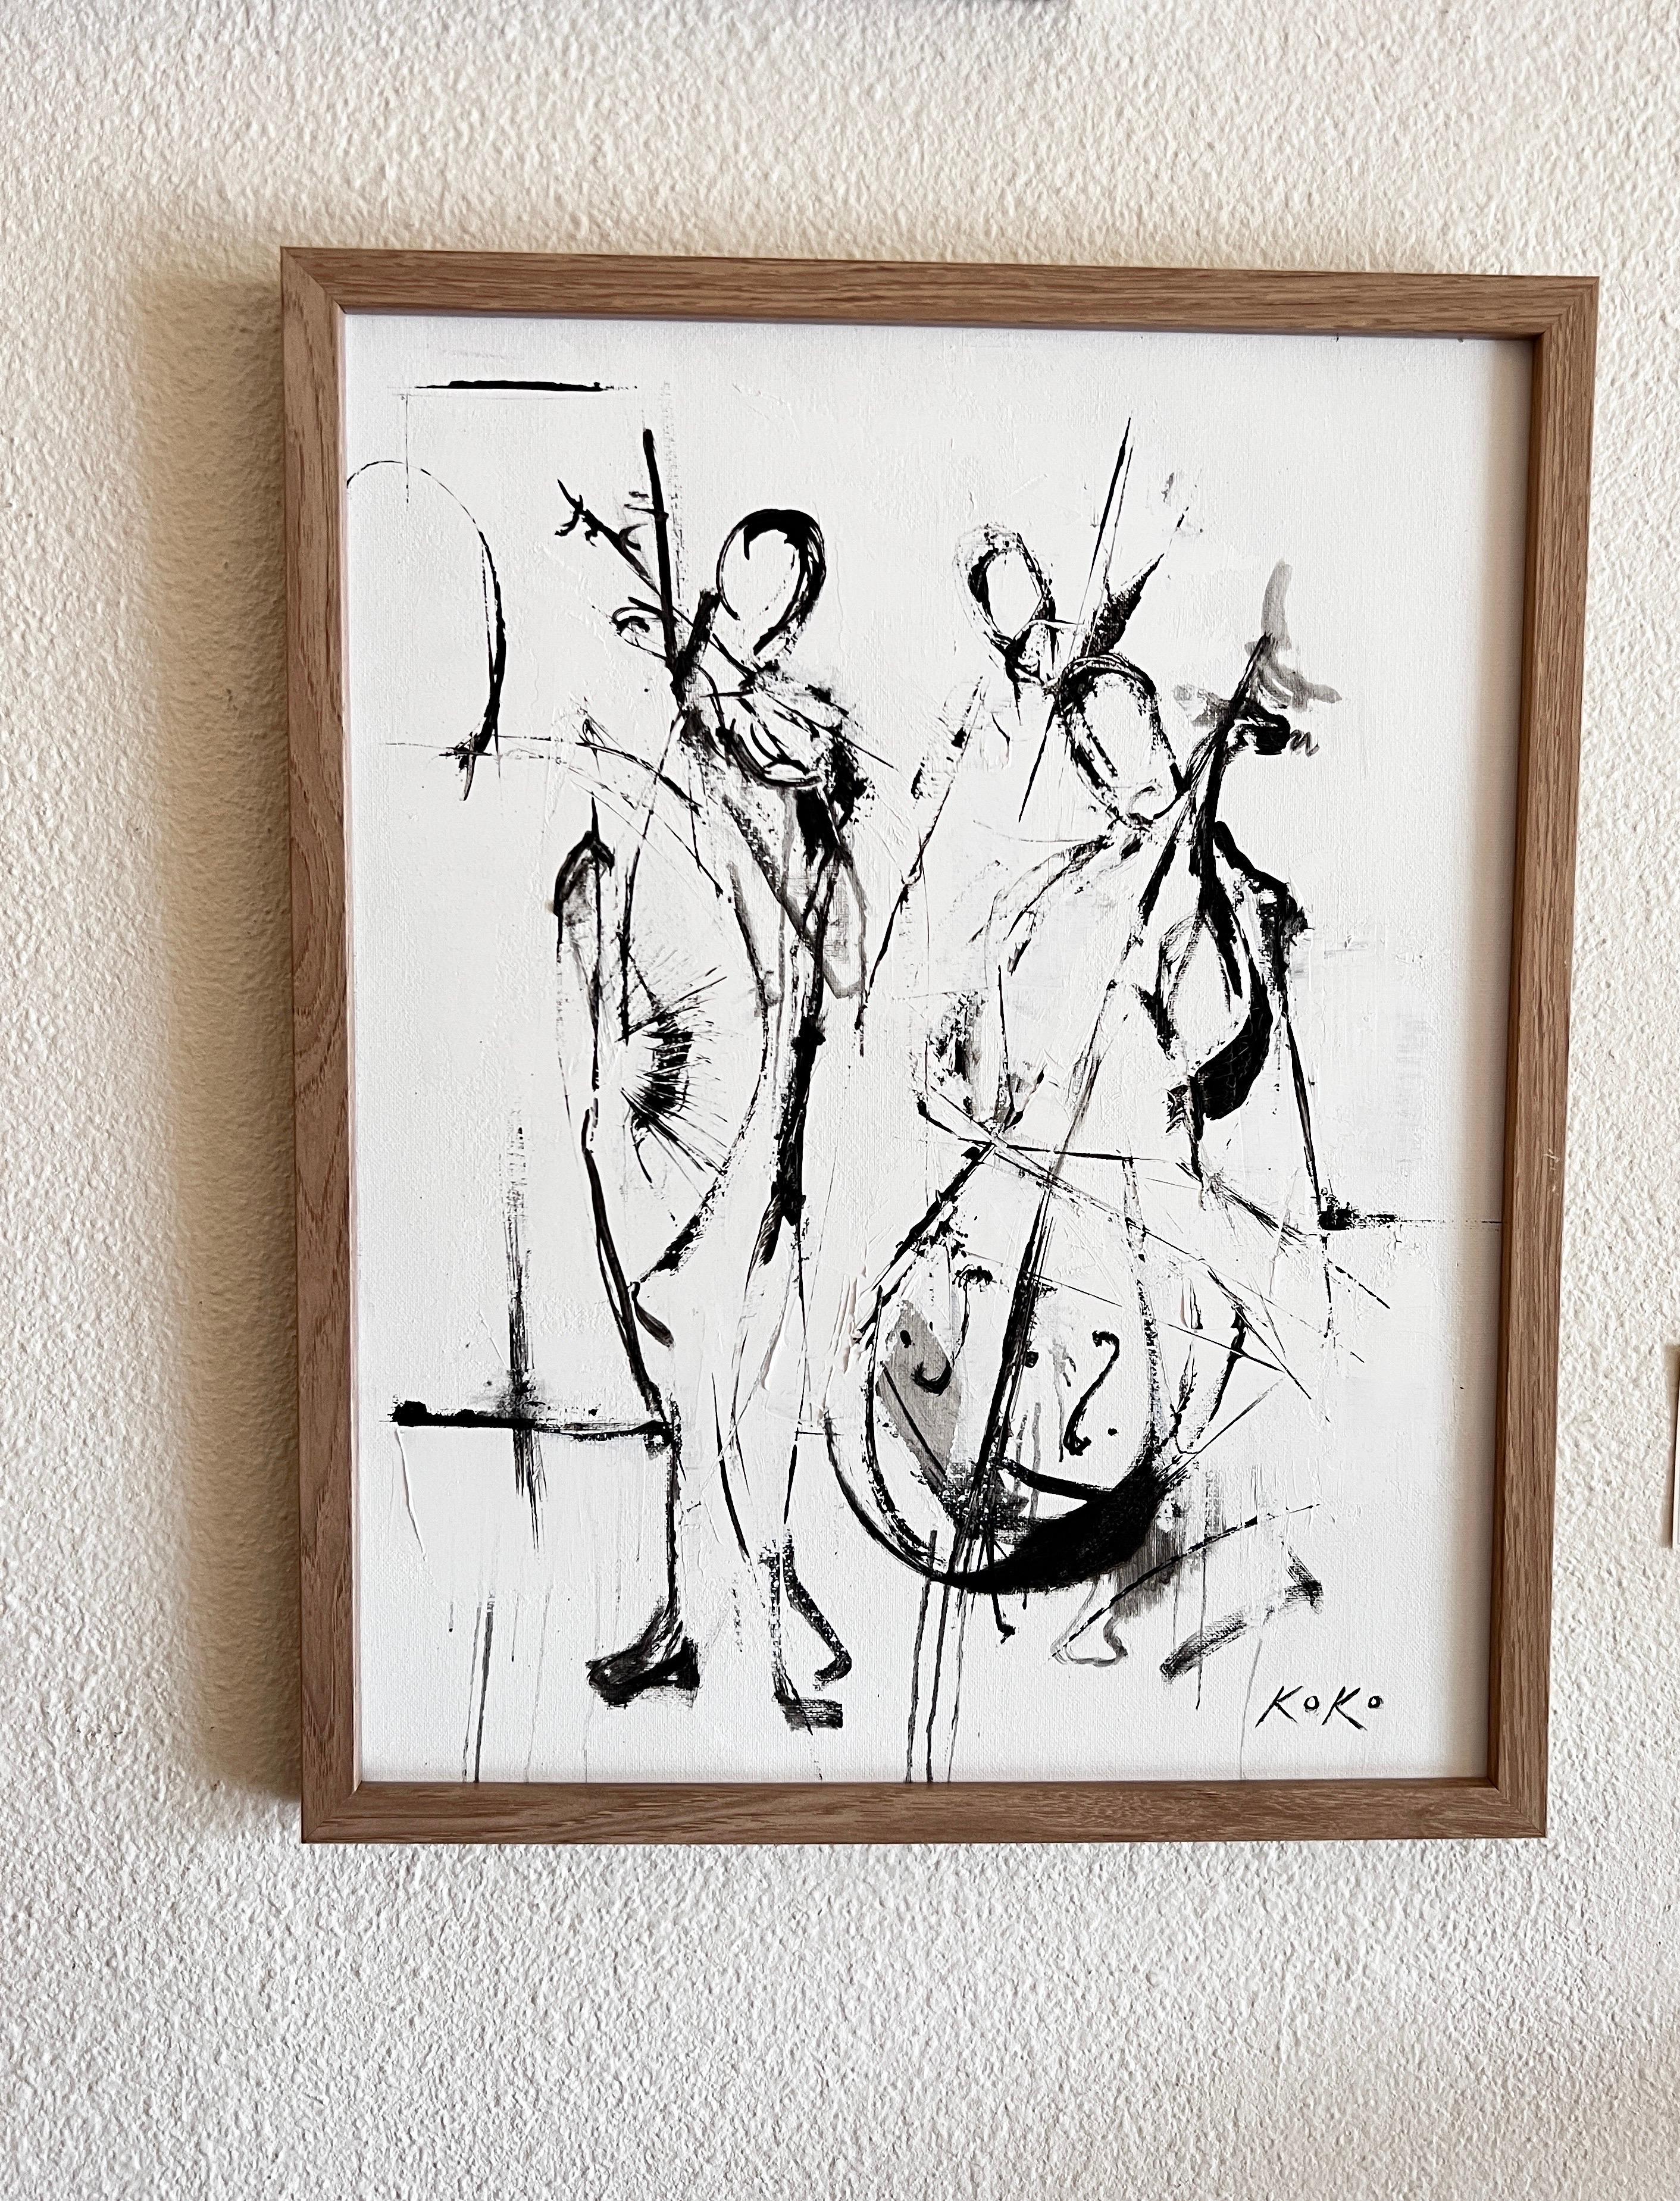 Musician Trio No 1 - Abstract Expressionist Painting by KOKO HOVAGUIMIAN